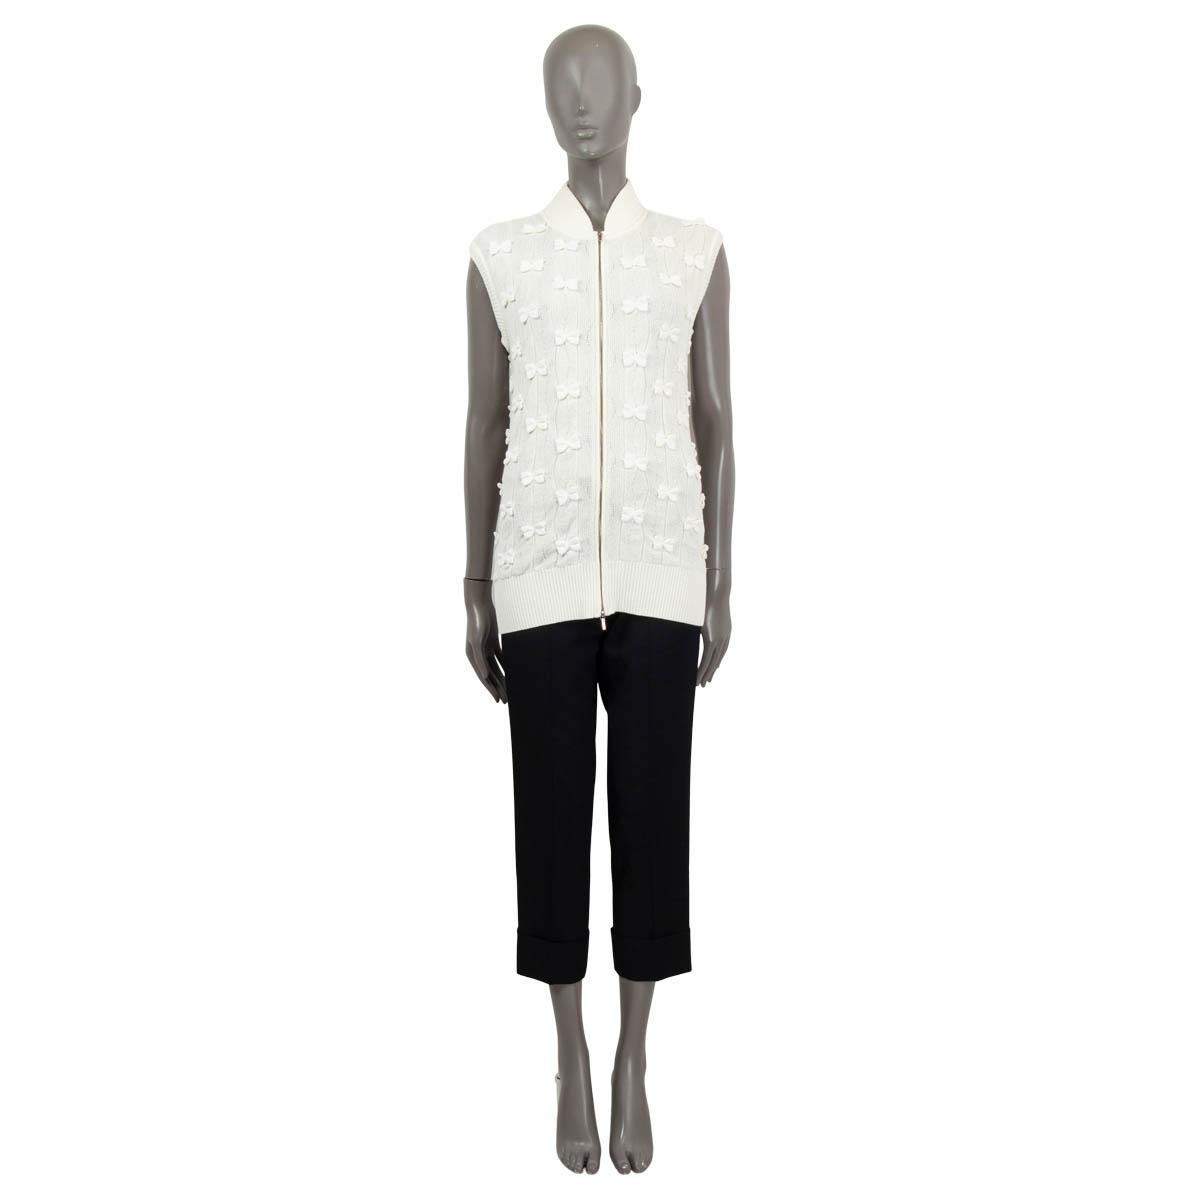 100% authentic Chanel knit vest in ivory colored cotton (63%), polyamide (36%) and elasthanne (1%). Features little embellished bows in ivory, a ripped stand-up collar and opens with a silver zipper in the front. Has been worn and is in excellent